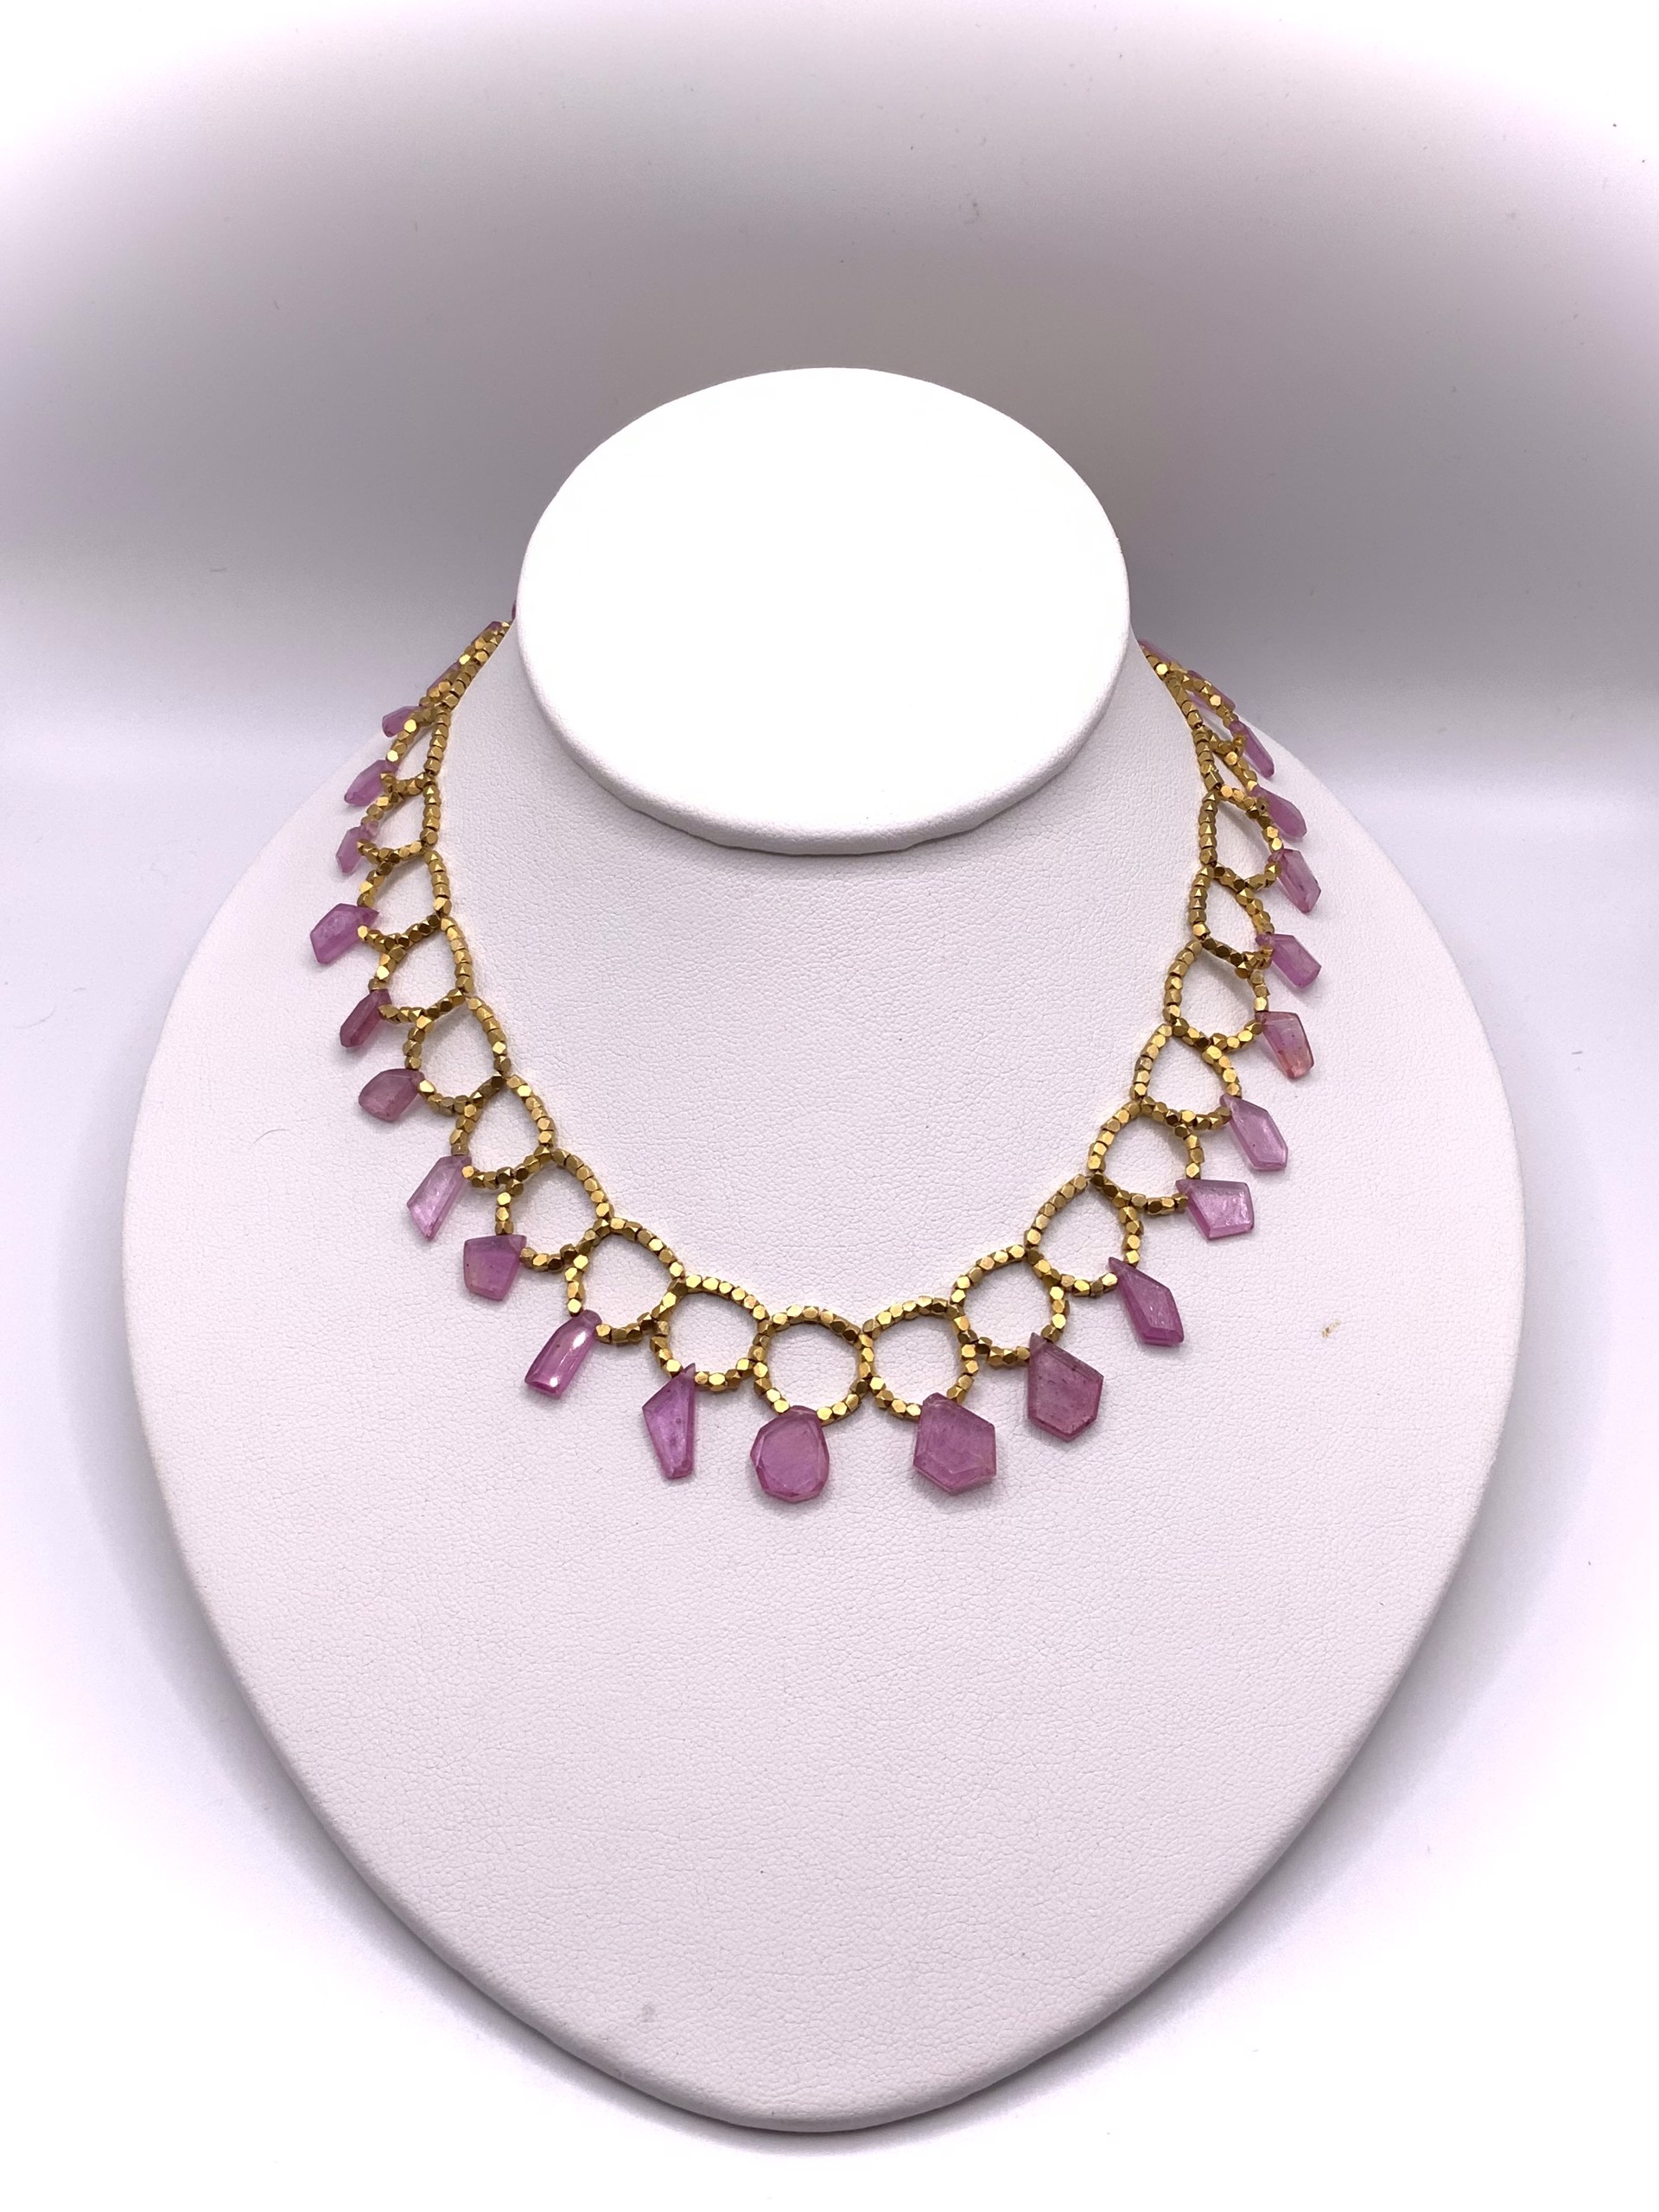 Entwine- Pink Sapphire Slices by Mara Labell